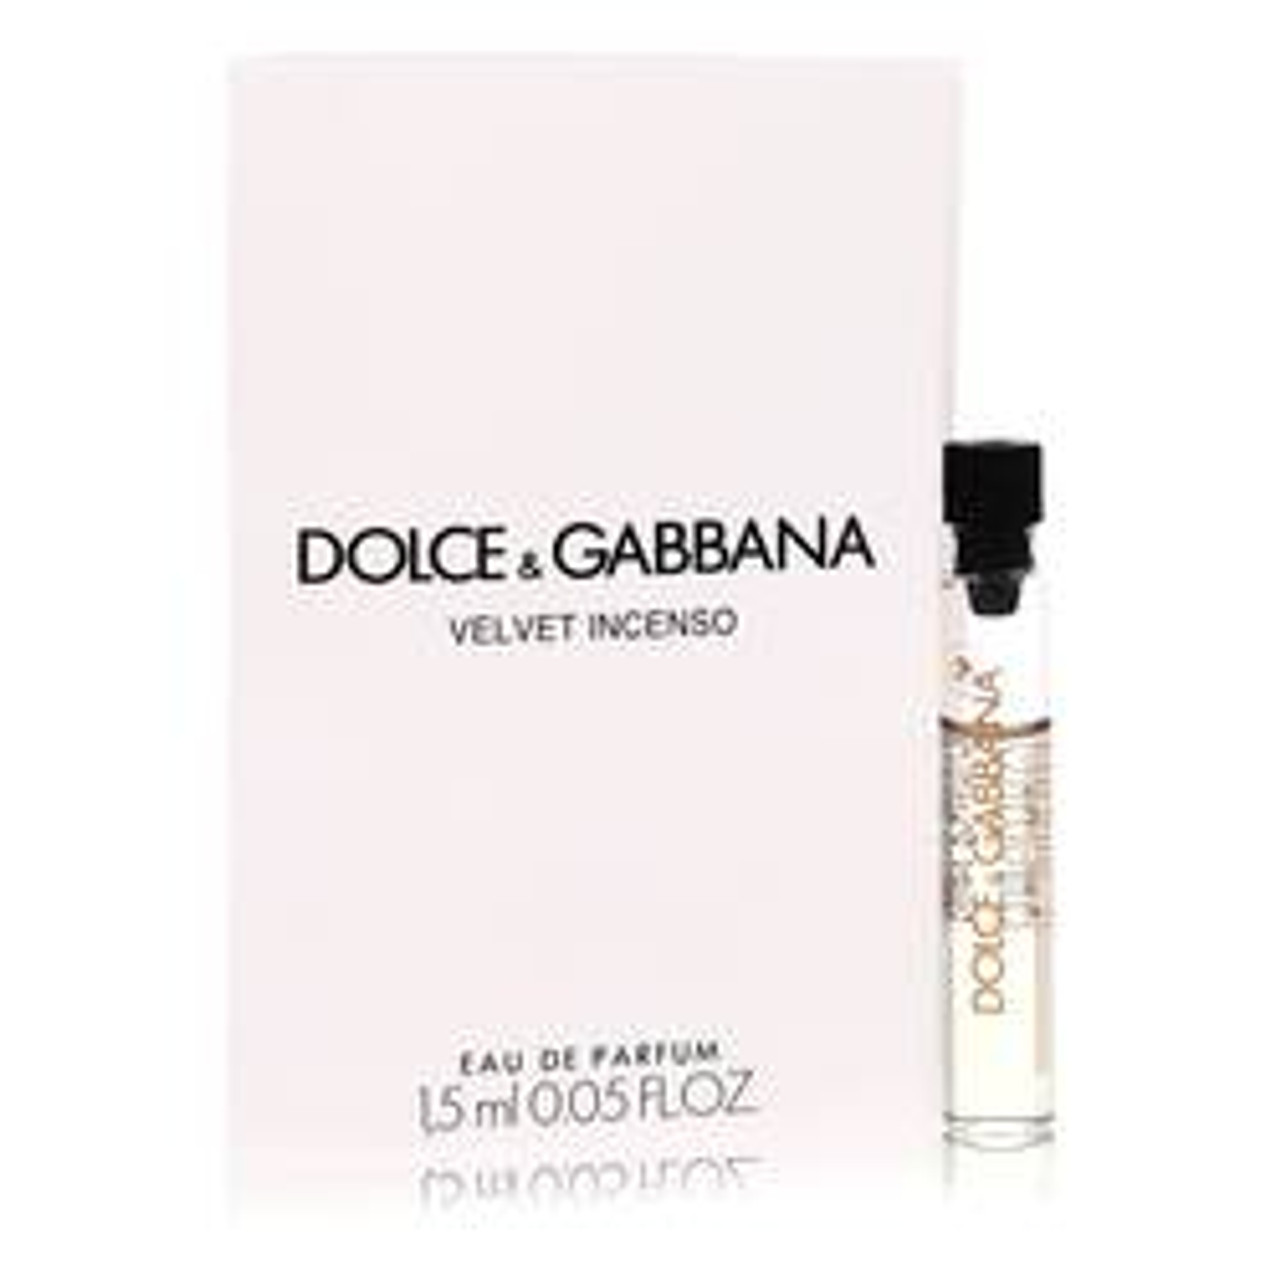 Dolce & Gabbana Velvet Incenso Perfume By Dolce & Gabbana Vial (sample) 0.05 oz for Women - [From 11.00 - Choose pk Qty ] - *Ships from Miami